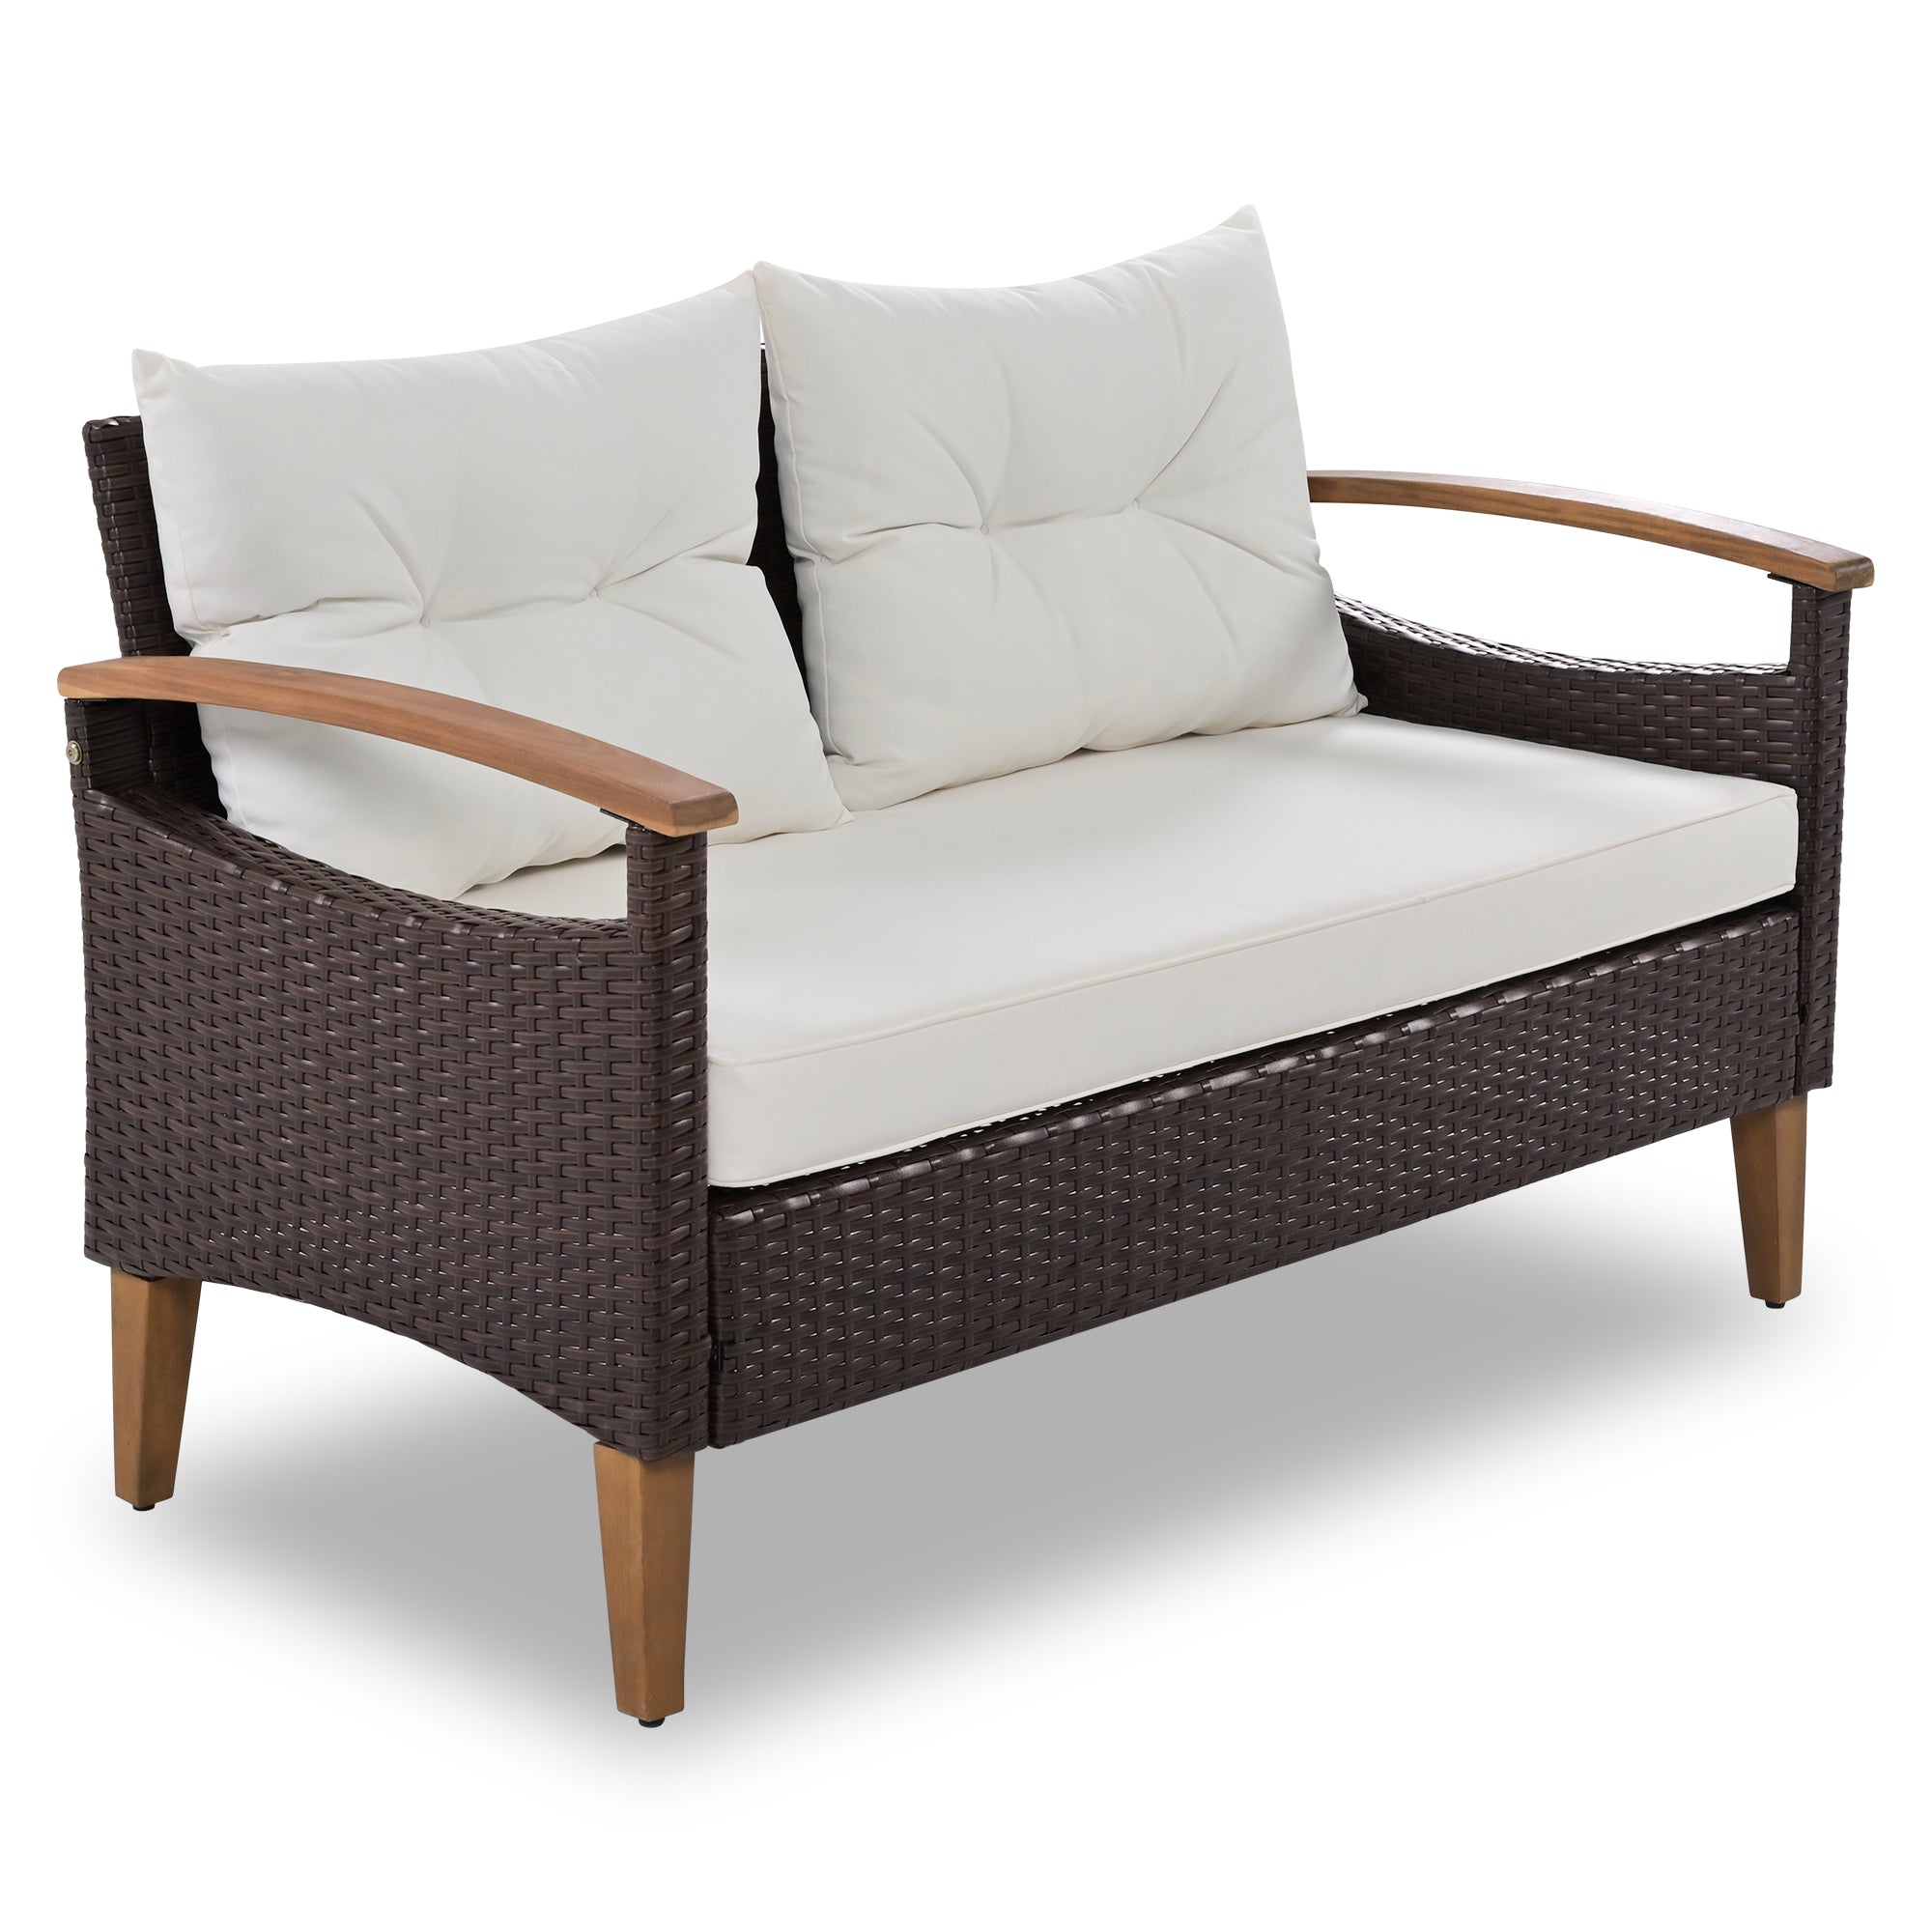 4-Piece PE Rattan Outdoor Sofa Chair Set with Wood Table and Legs